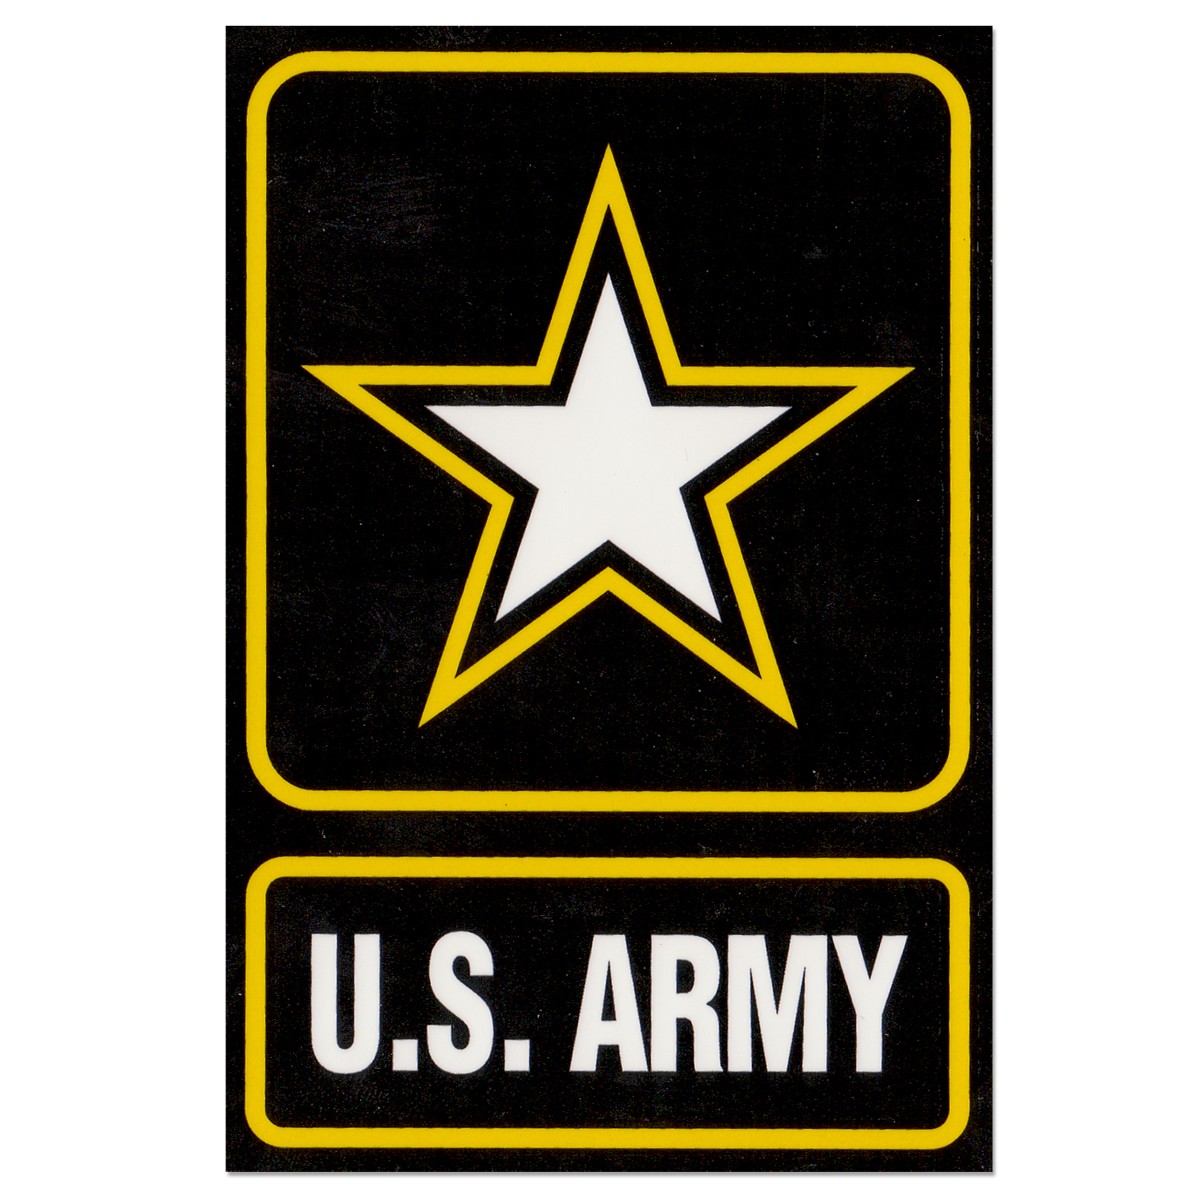 US ARMY DEPT OF THE ARMY DECAL MILITARY